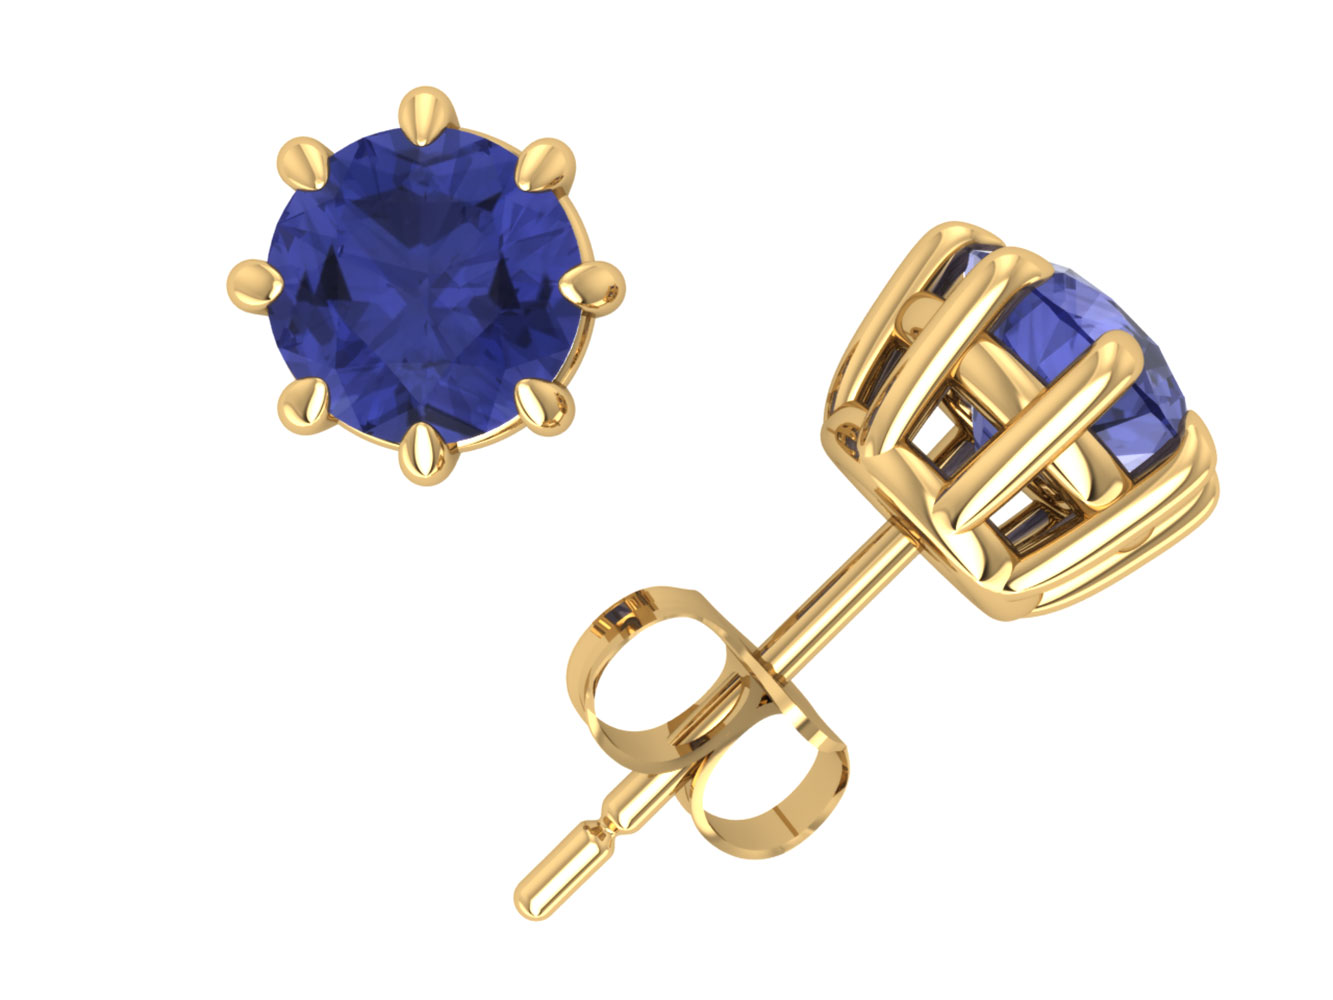 Jewel We Sell Natural 1Ct Round Cut Tanzanite Basket Stud Earrings 14k White or Yellow Gold Prong Push Back AA Quality